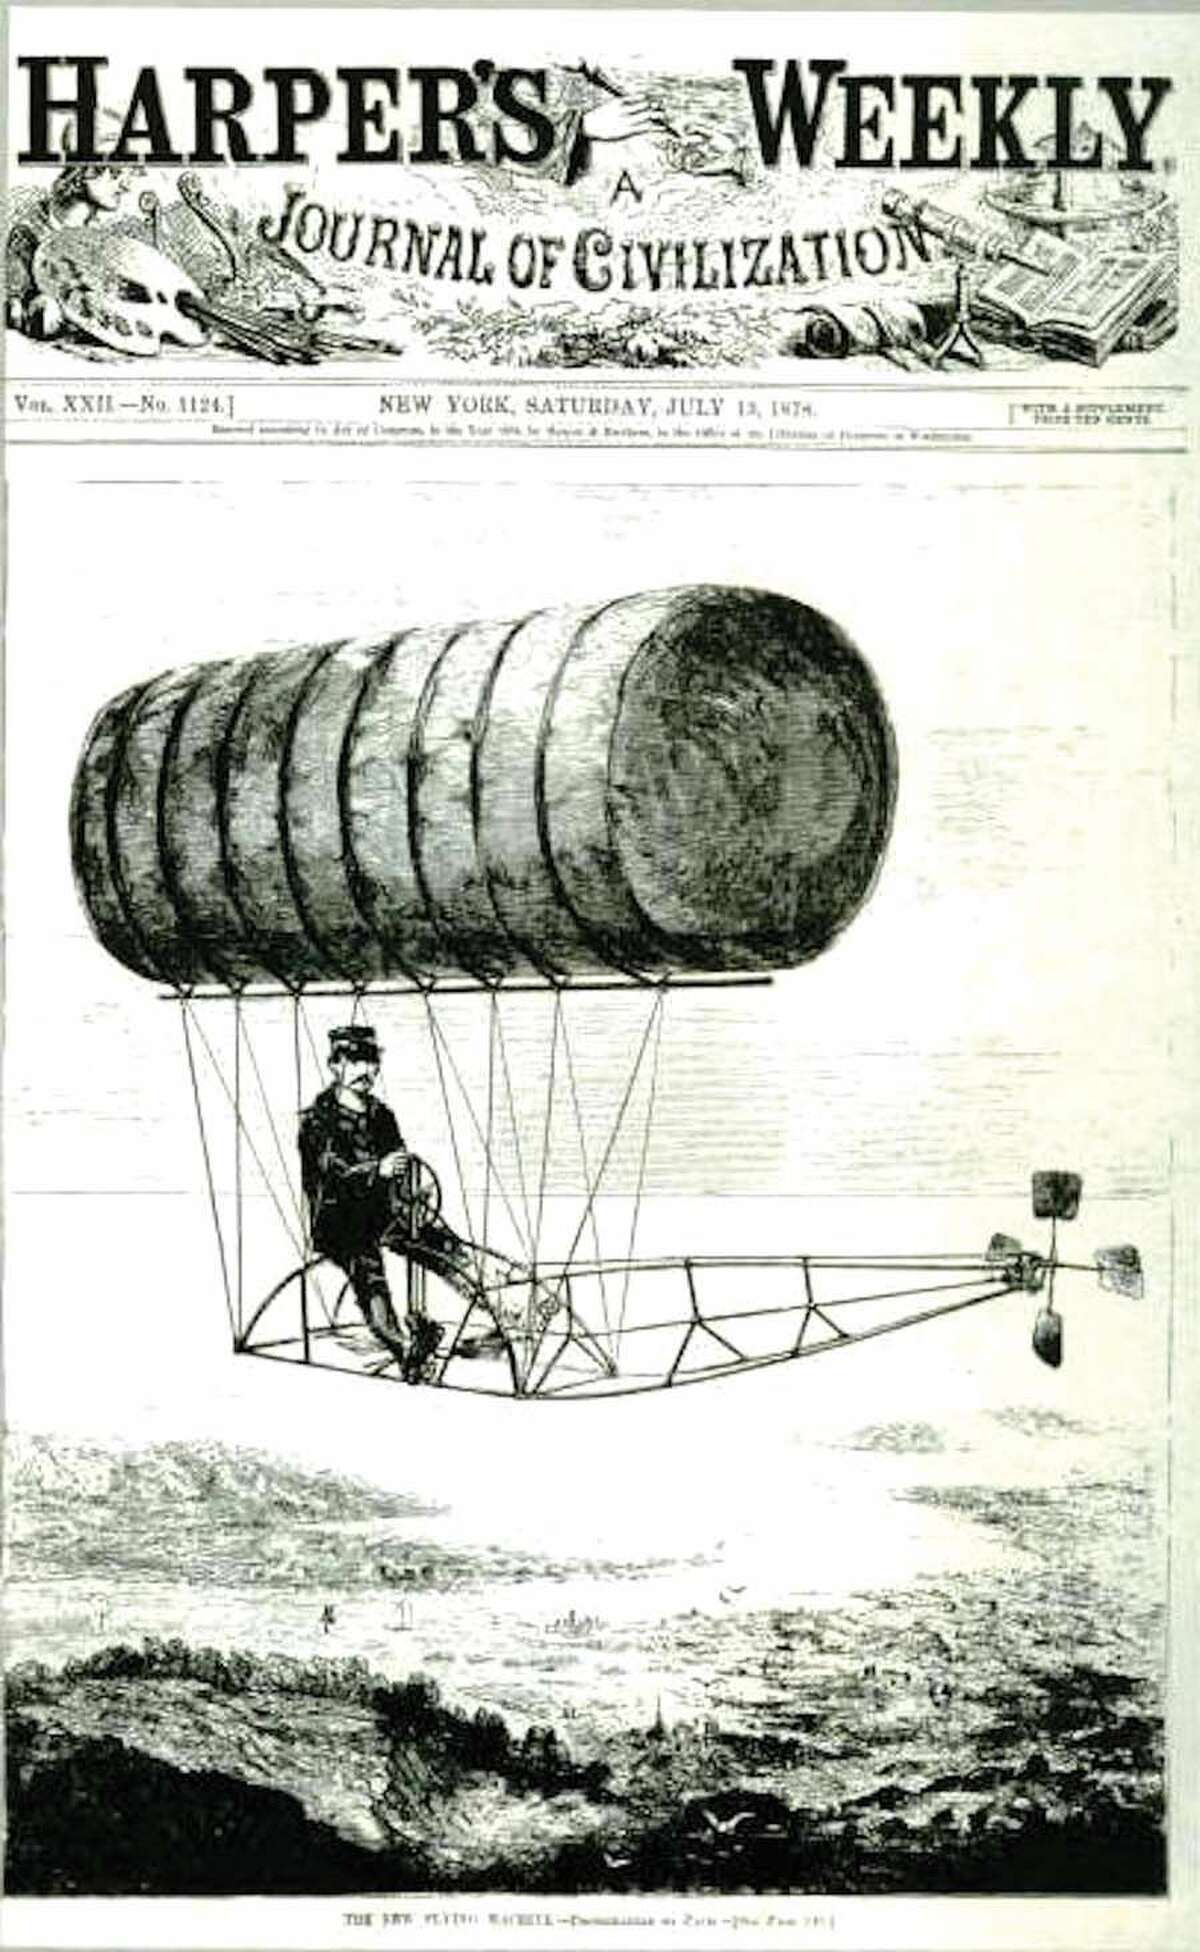 Mark Quinlan's flight on Charles F. Ritchel, machine, as depicted on the cover of Harper's magazine.